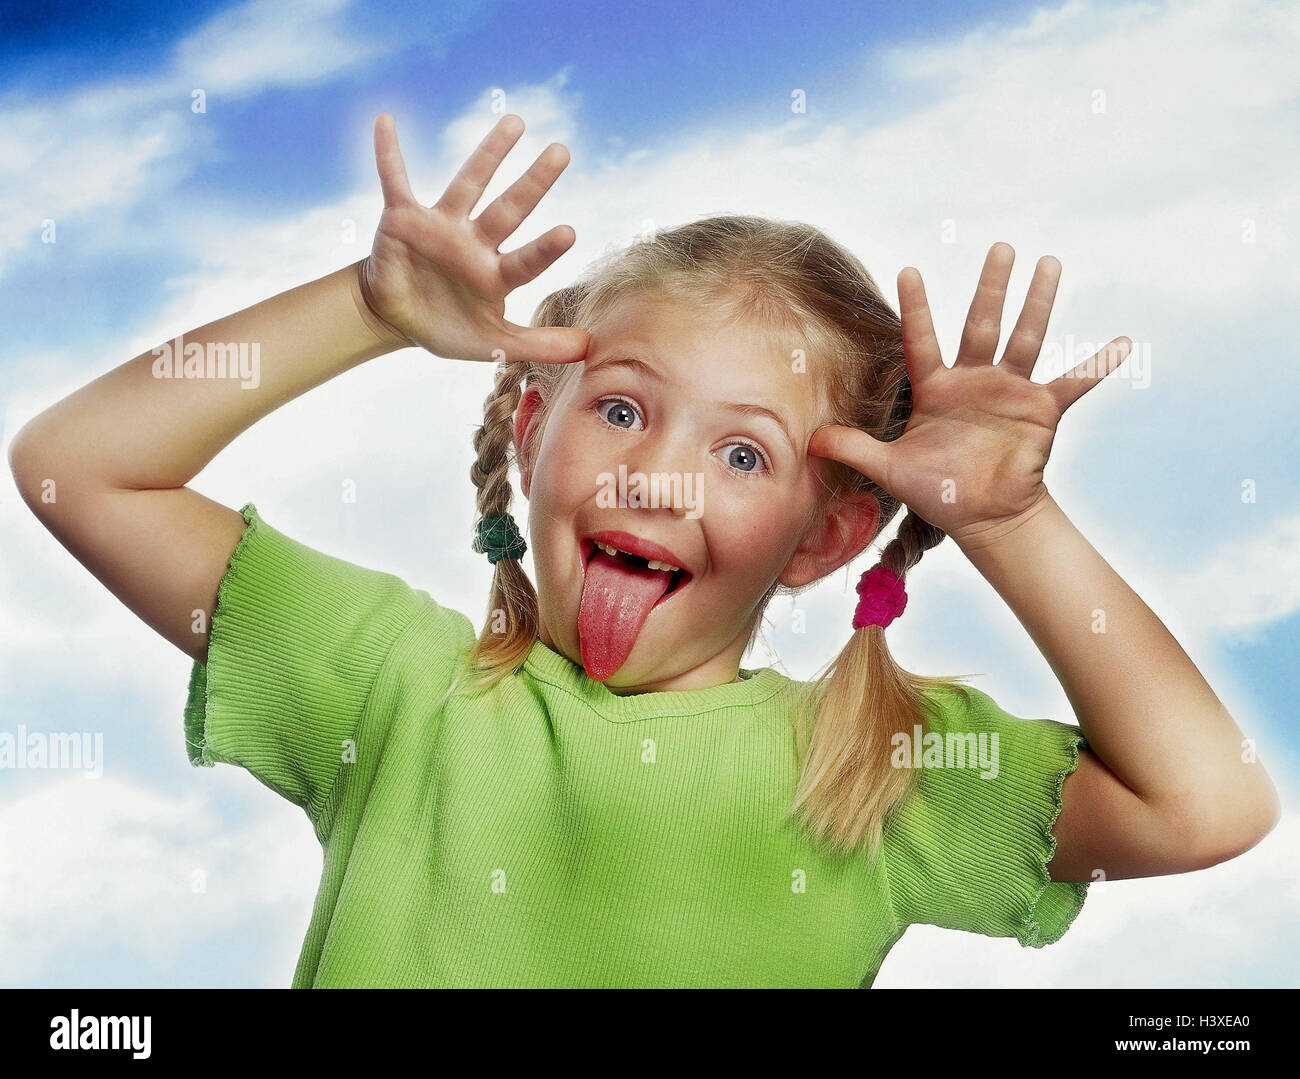 Girls, plaits, gesture, cheeky, tongue, point, portrait, children, studio, cut outs, boorishly, naughtily, child, annoy, grimace, stick out, perky Stock Photo